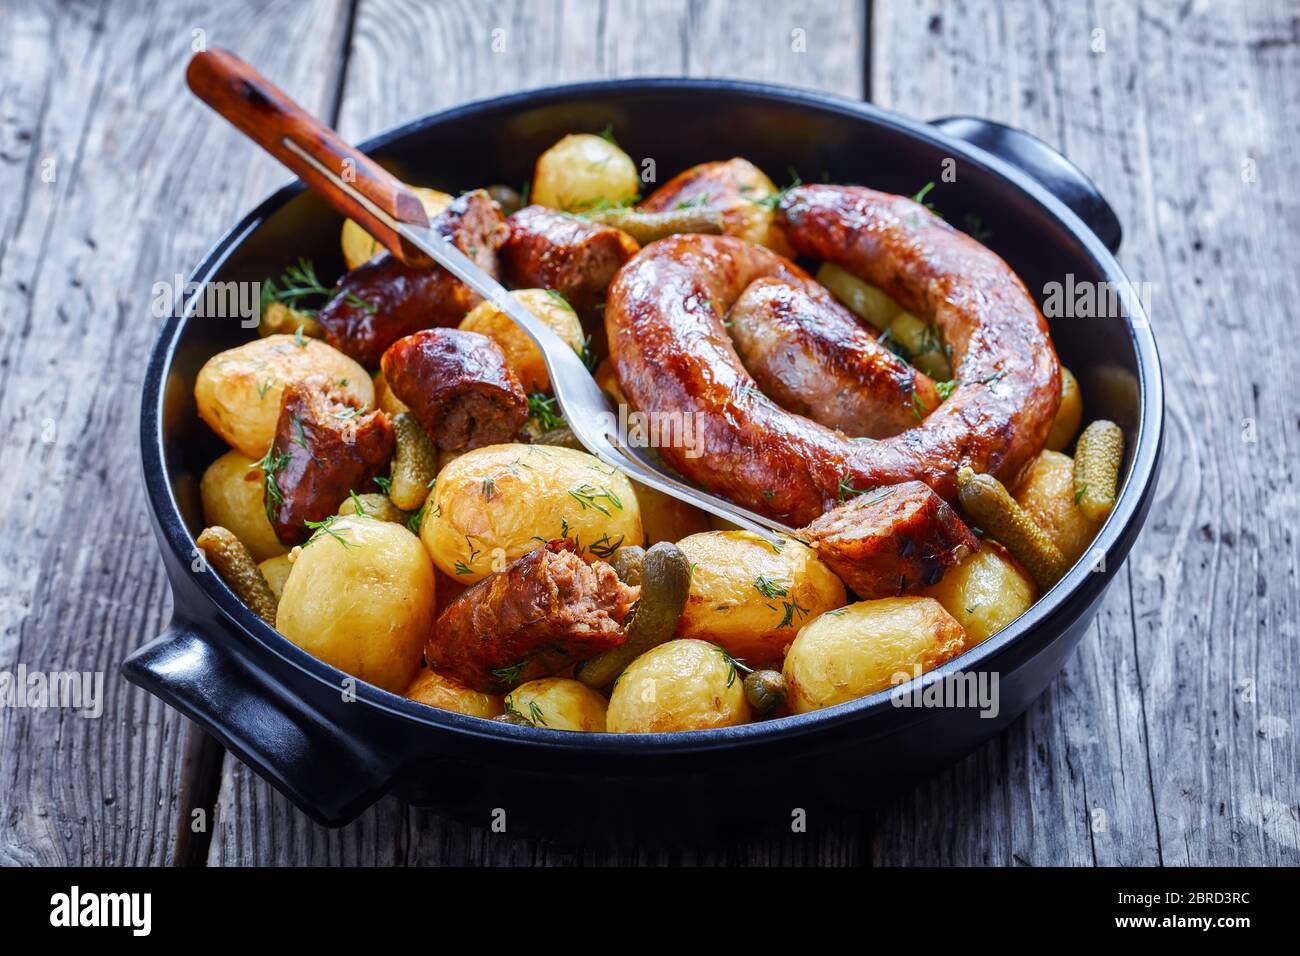 Italian sausage roasted with new potato and gherkins, sprinkled with fresh dill on a black baking dish on a wooden table, close-up Stock Photo